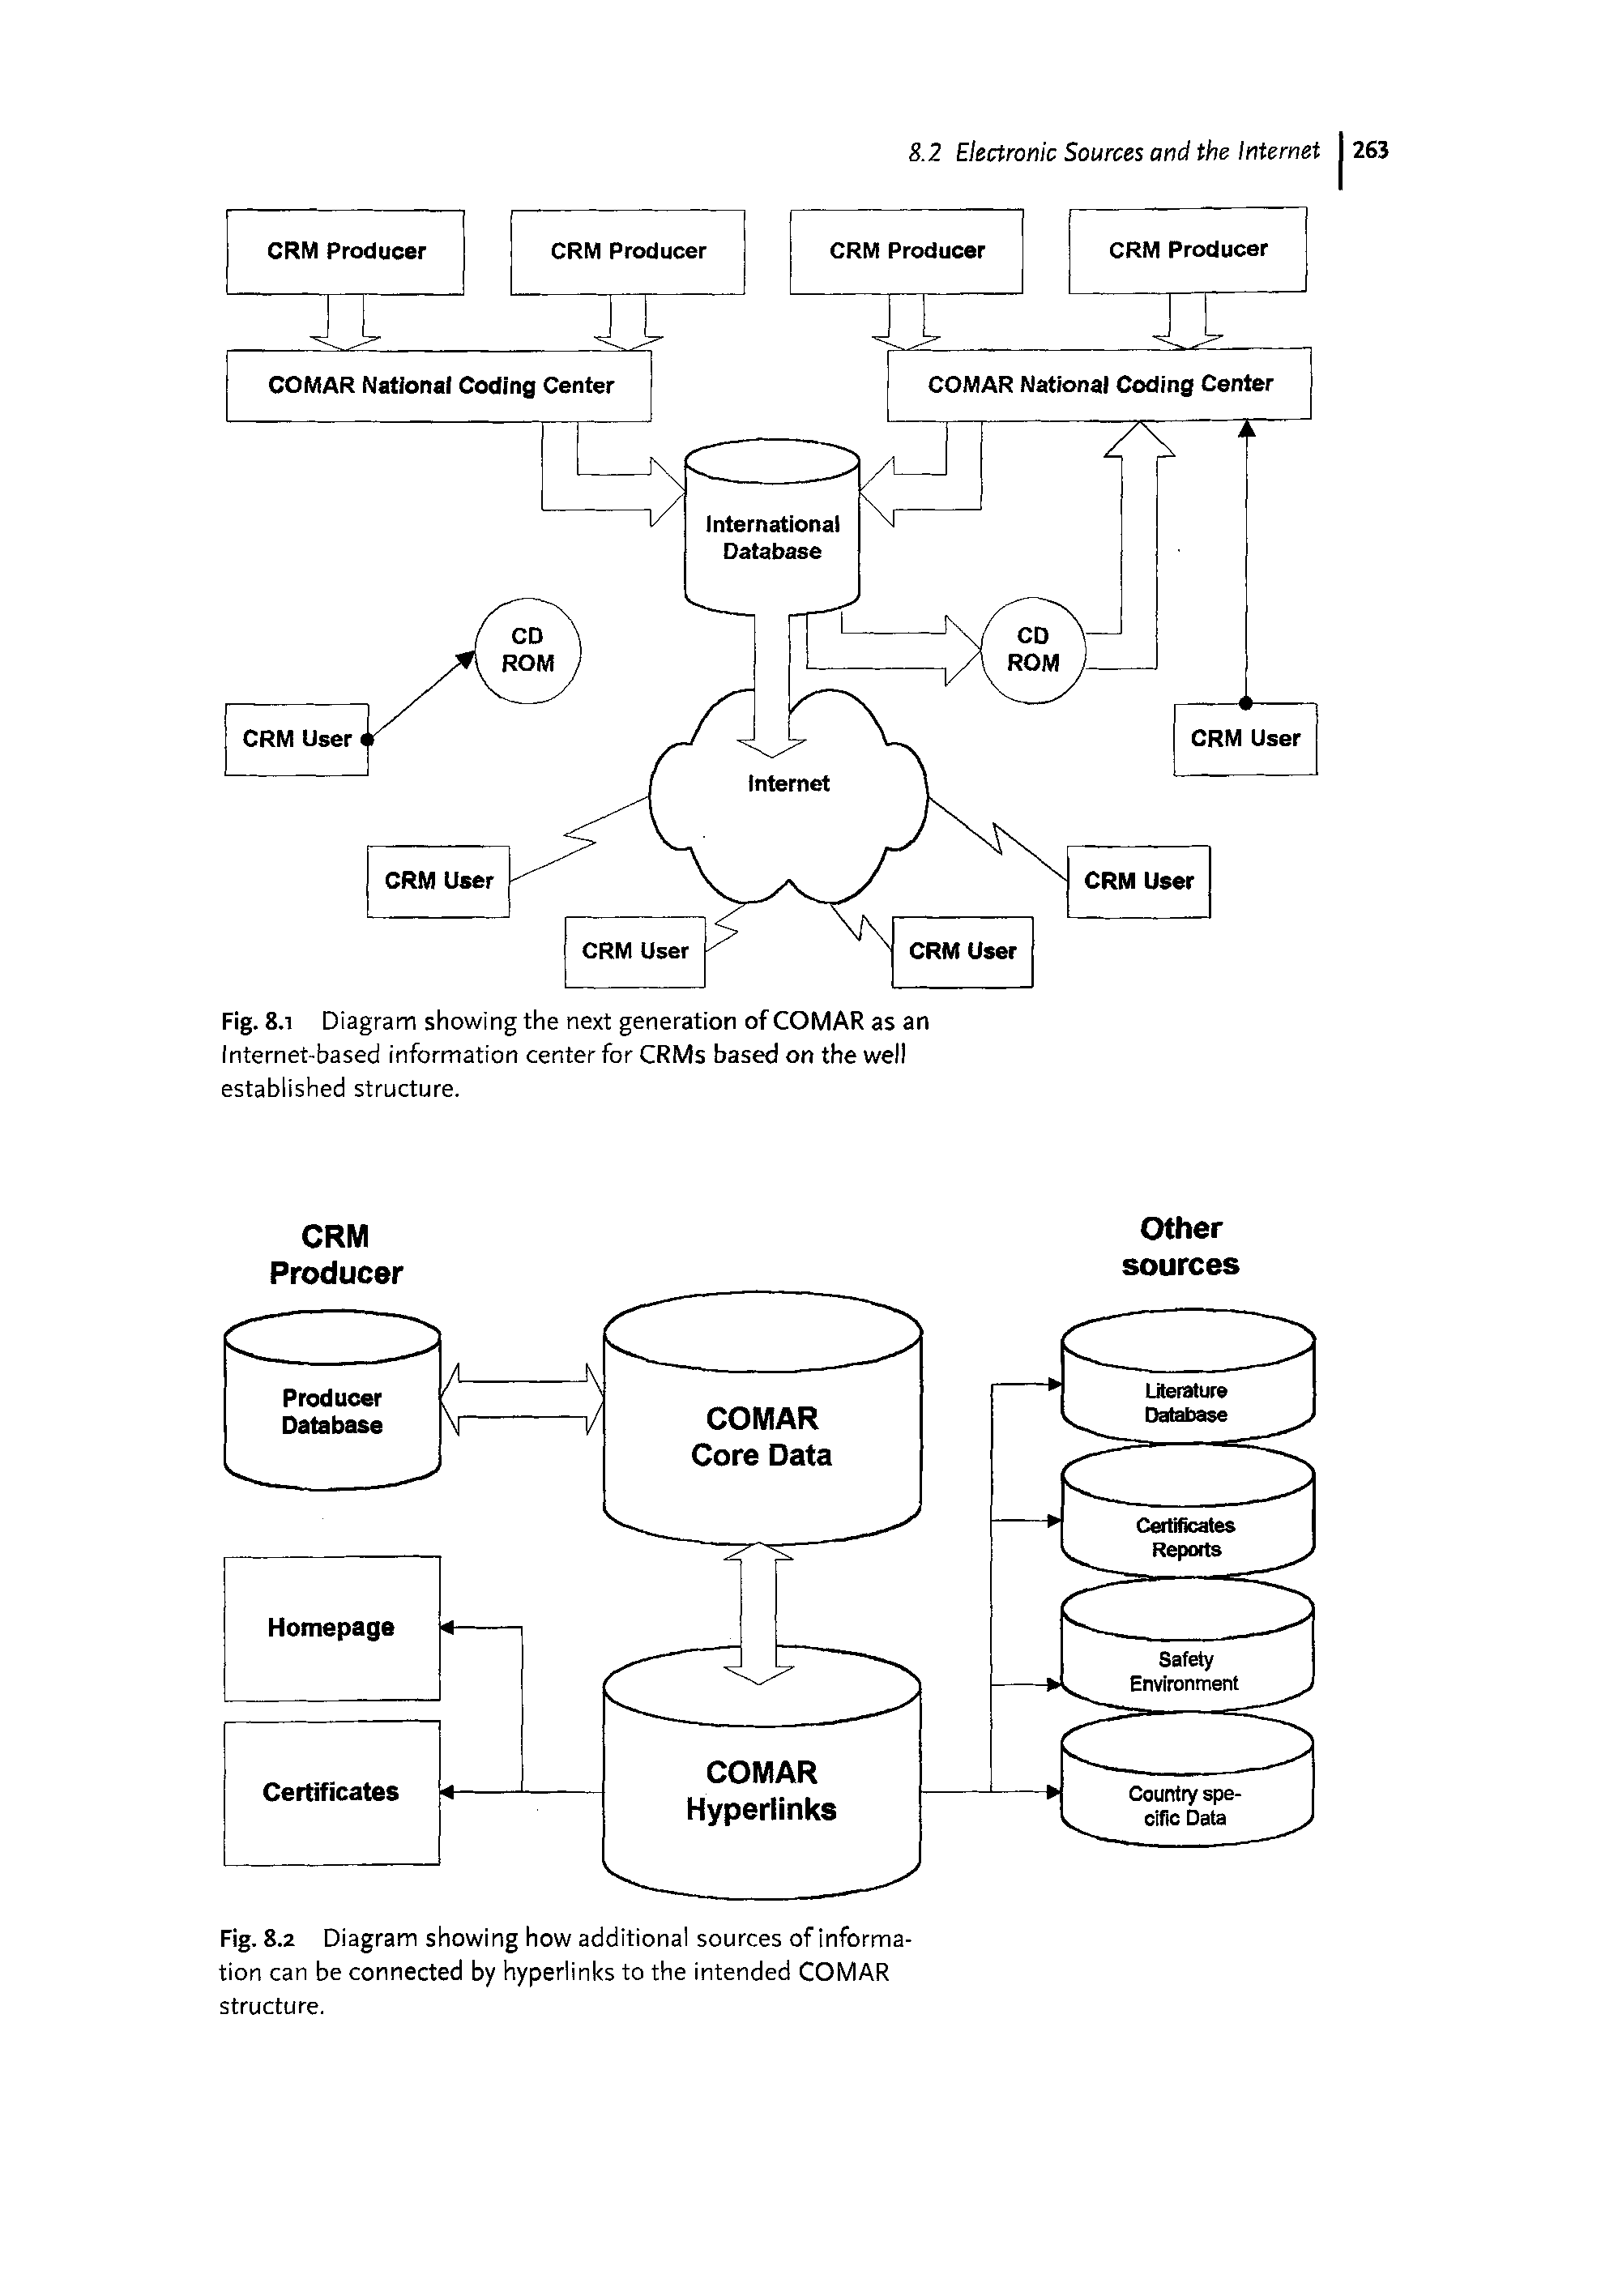 Fig. 8.1 Diagram showing the next generation of COMAR as an Internet-based information center for CRMs based on the well established structure.